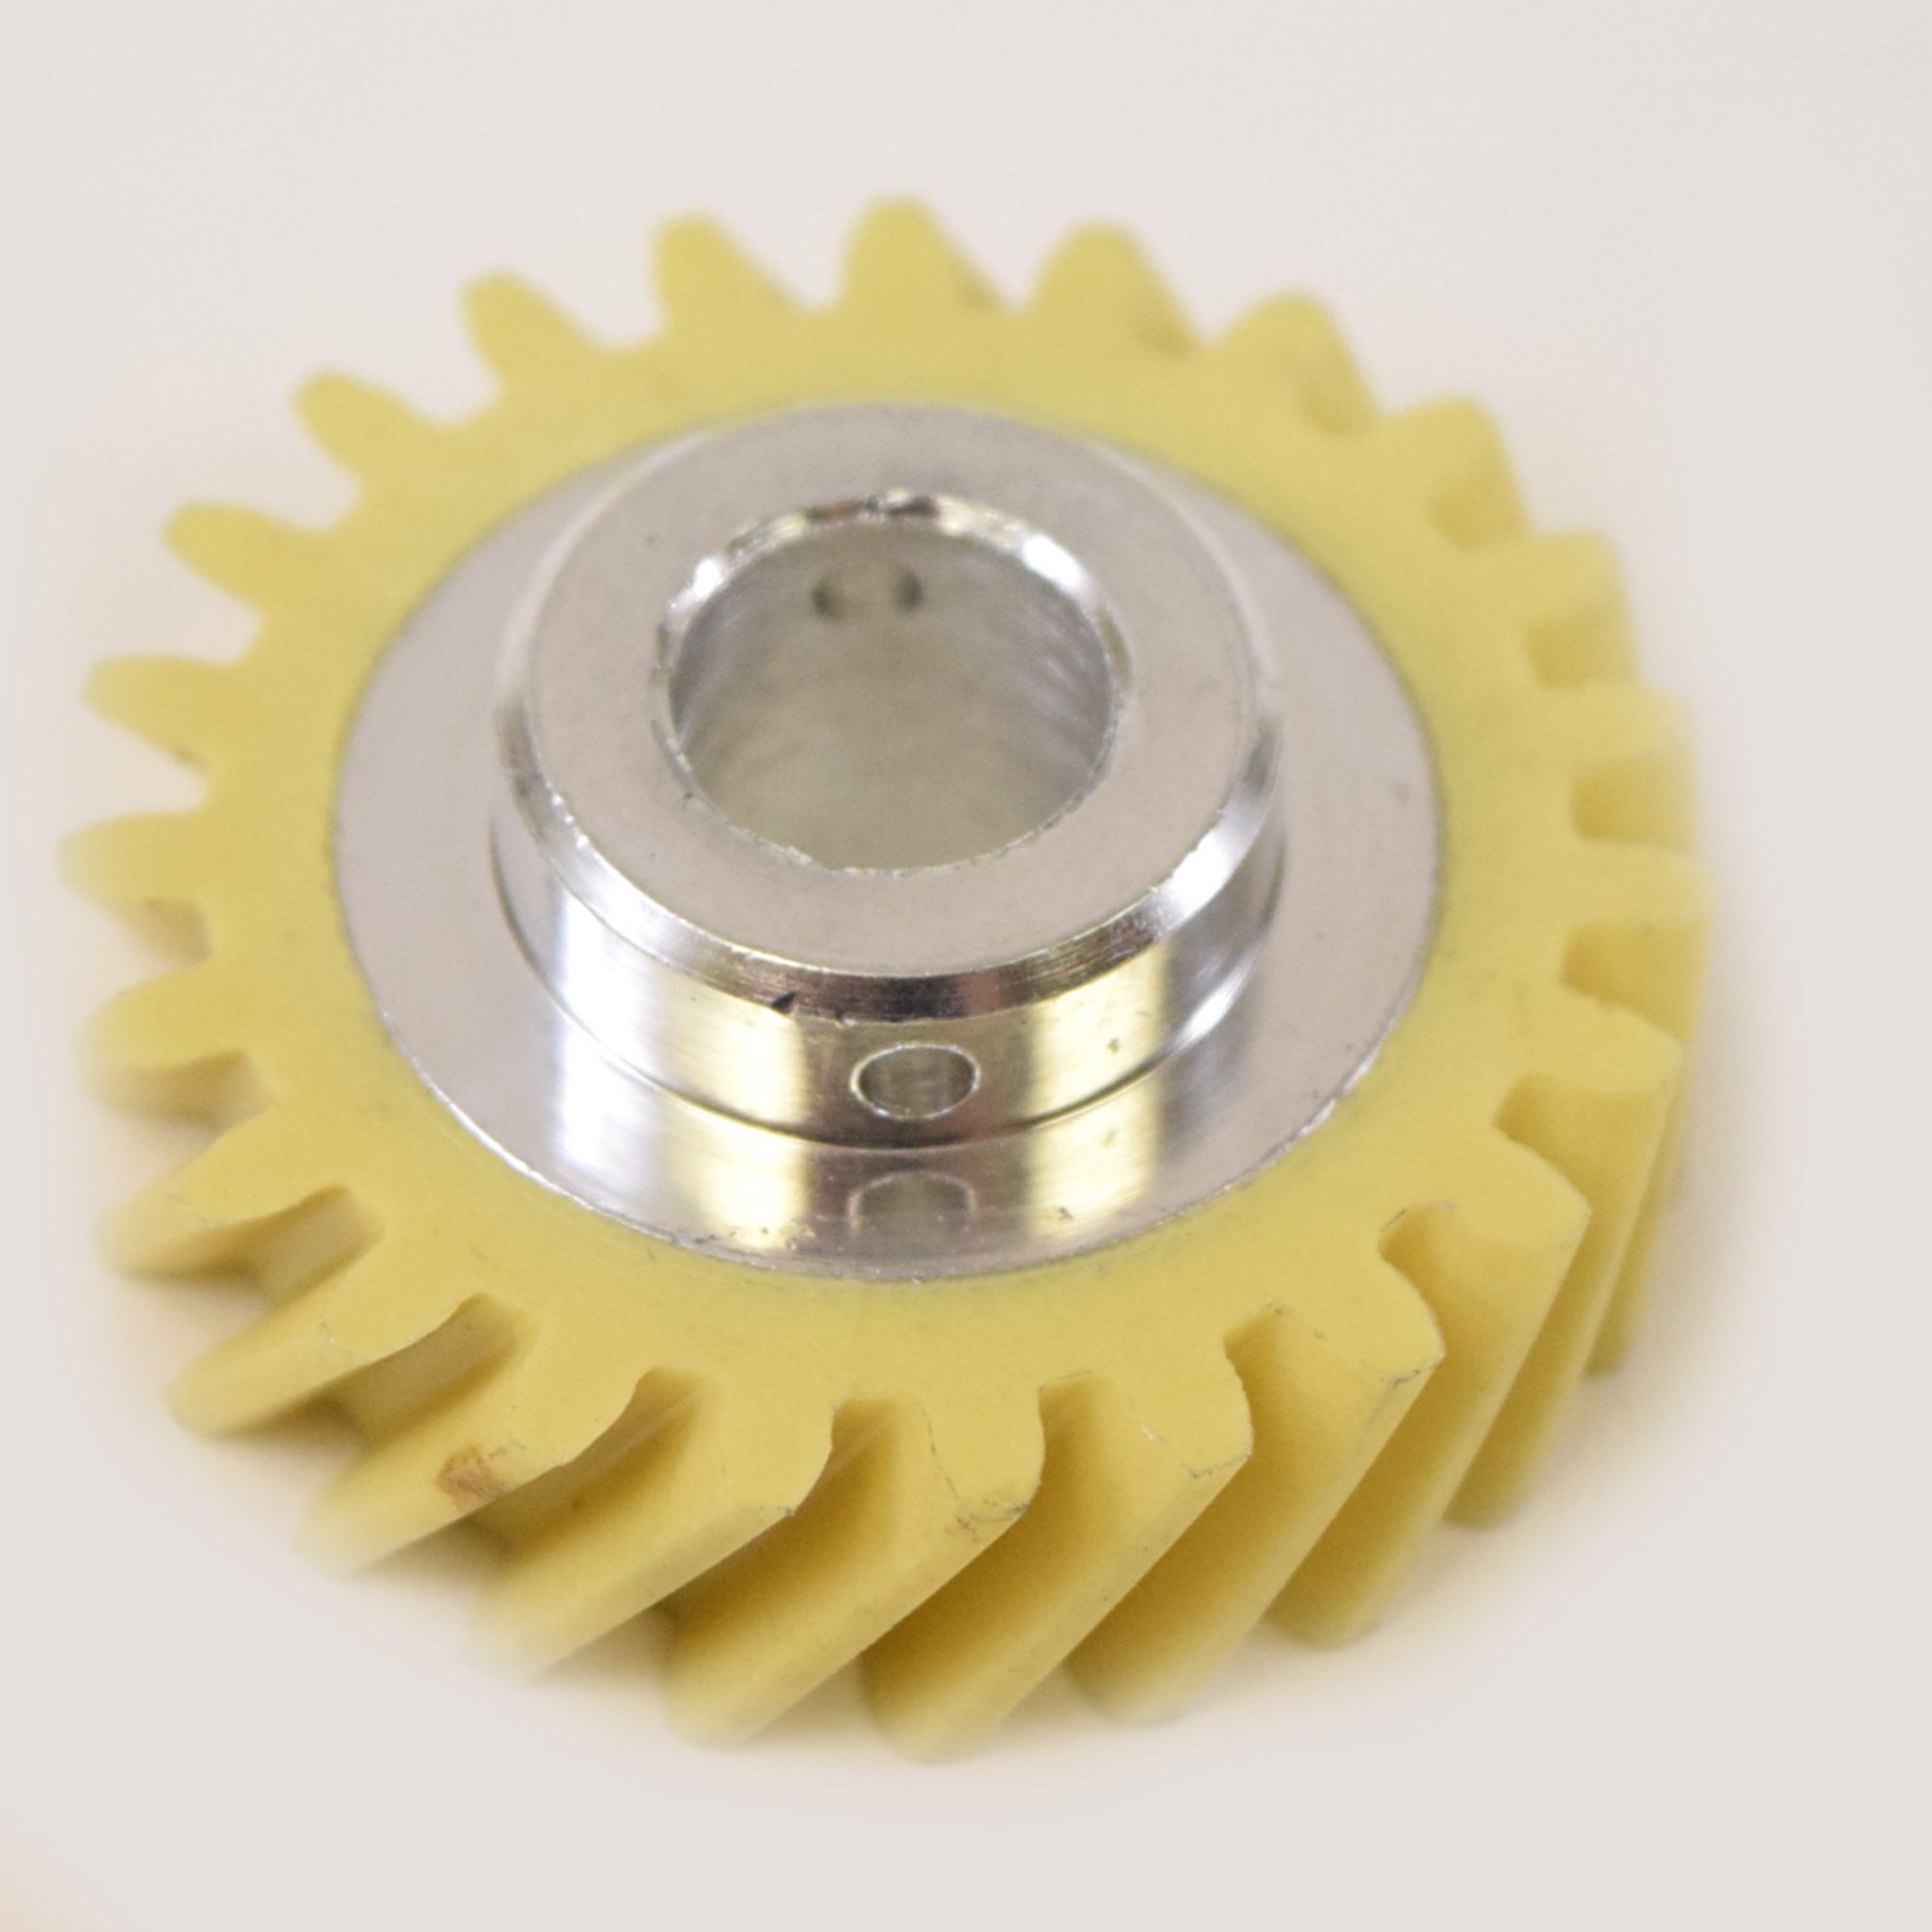 How replace a stand mixer worm gear | Repair